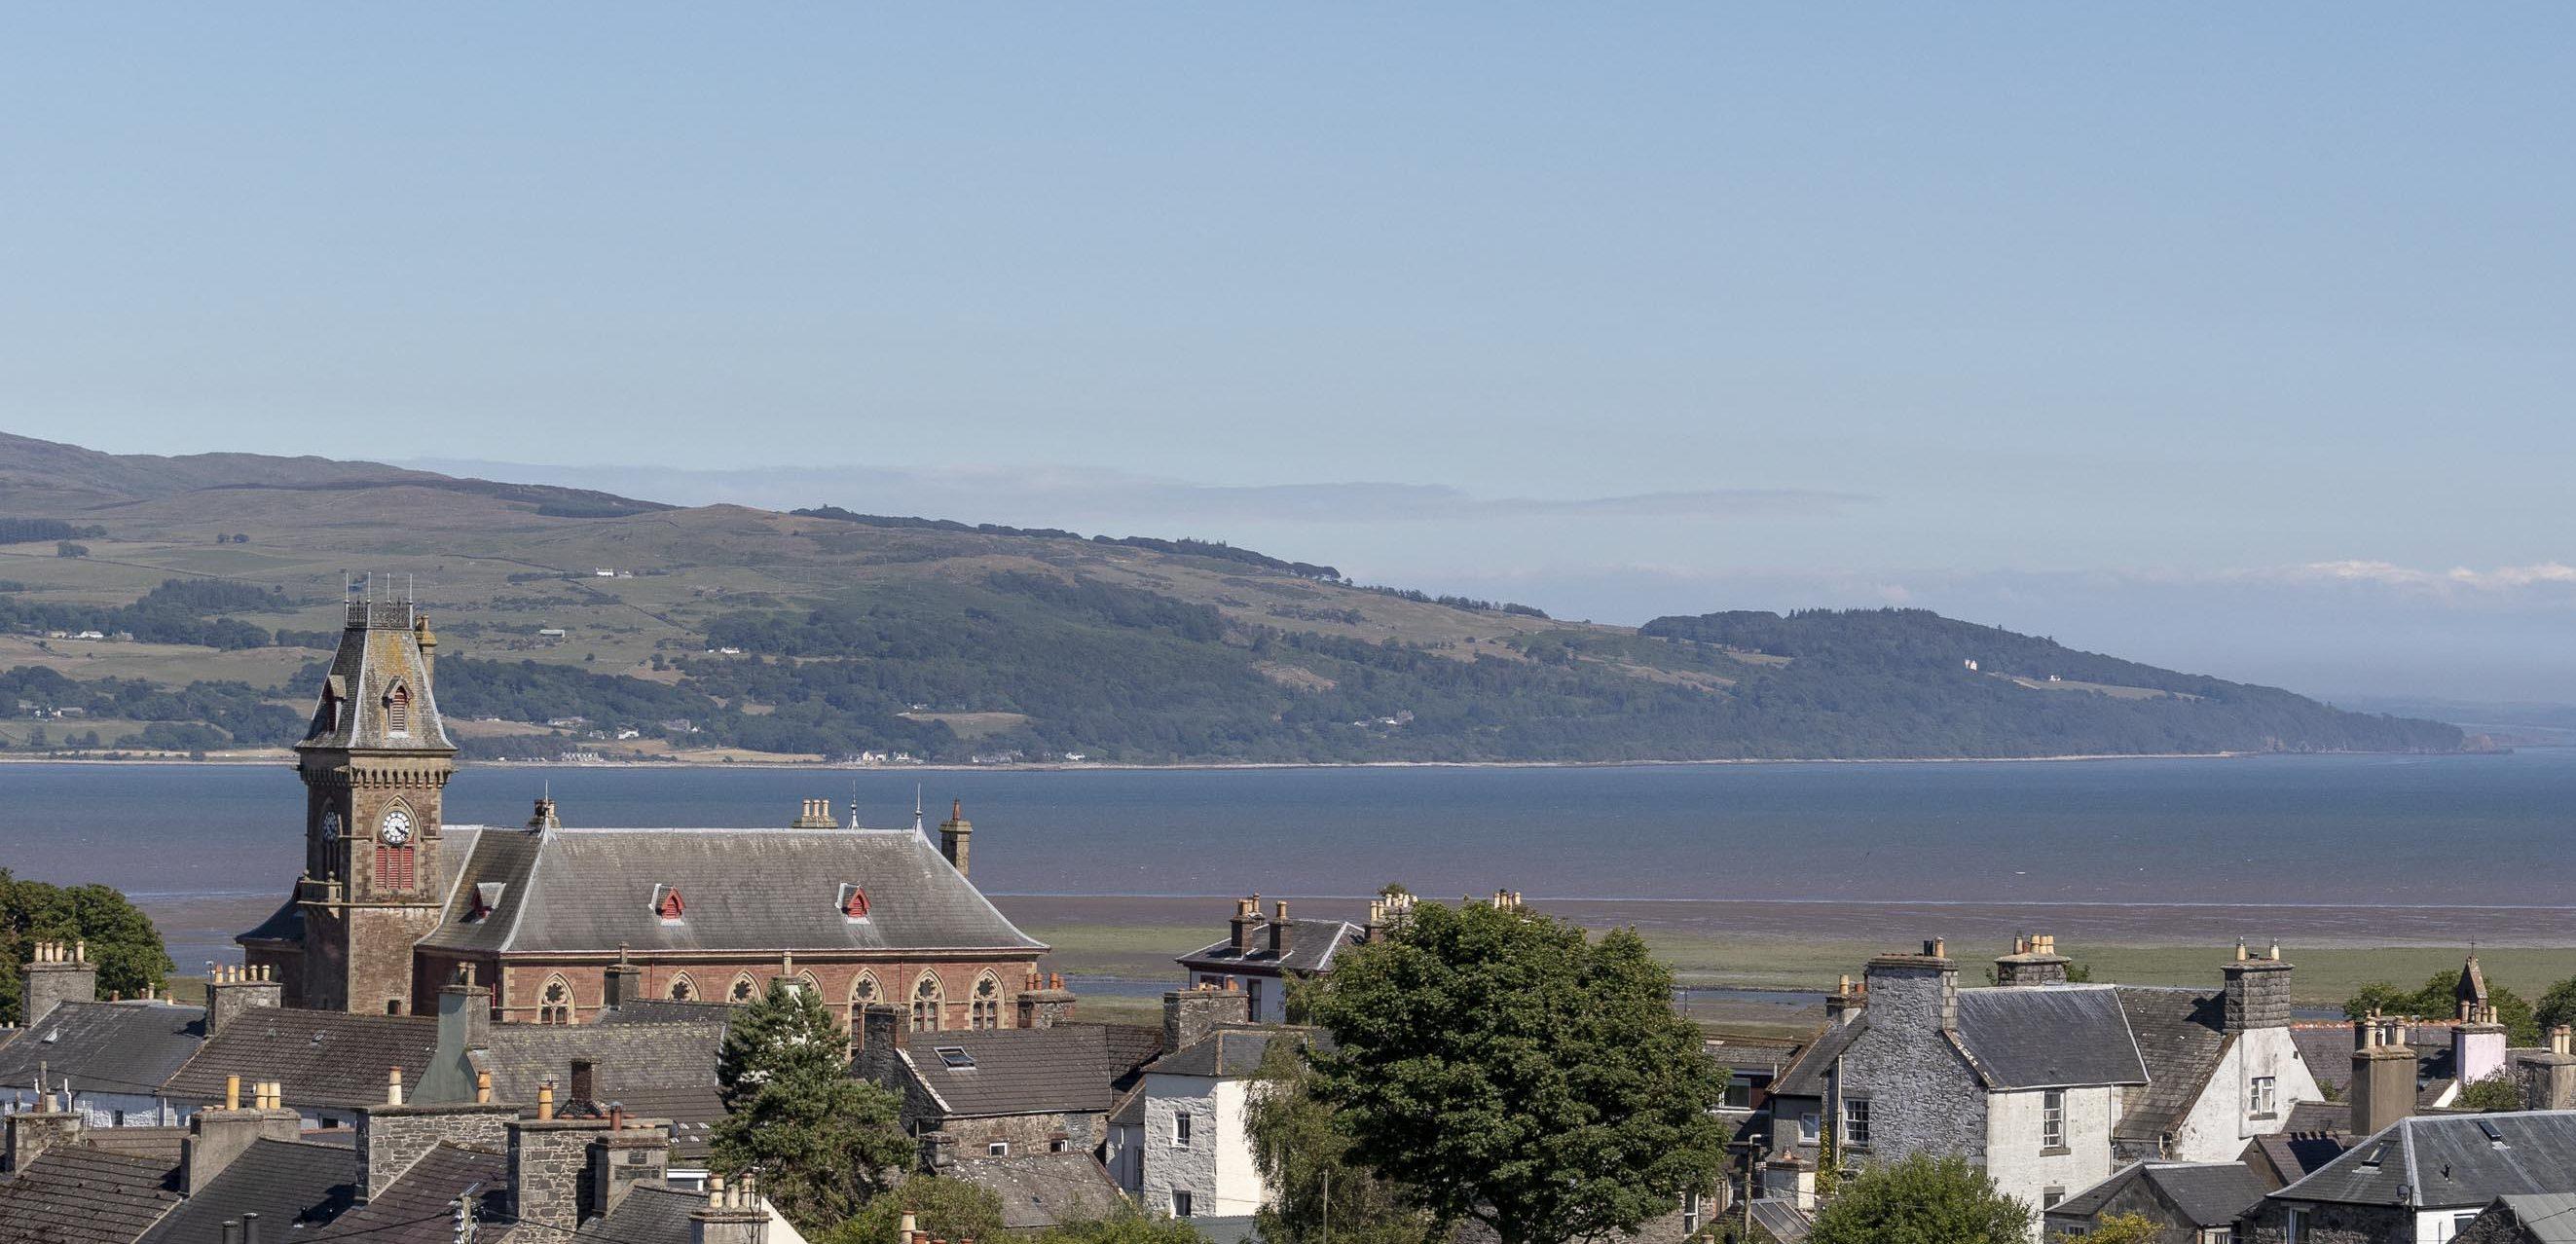 Rooftop view over Wigtown, the County Buildings clock tower, cree estuary and Galloway hills are in the distance.